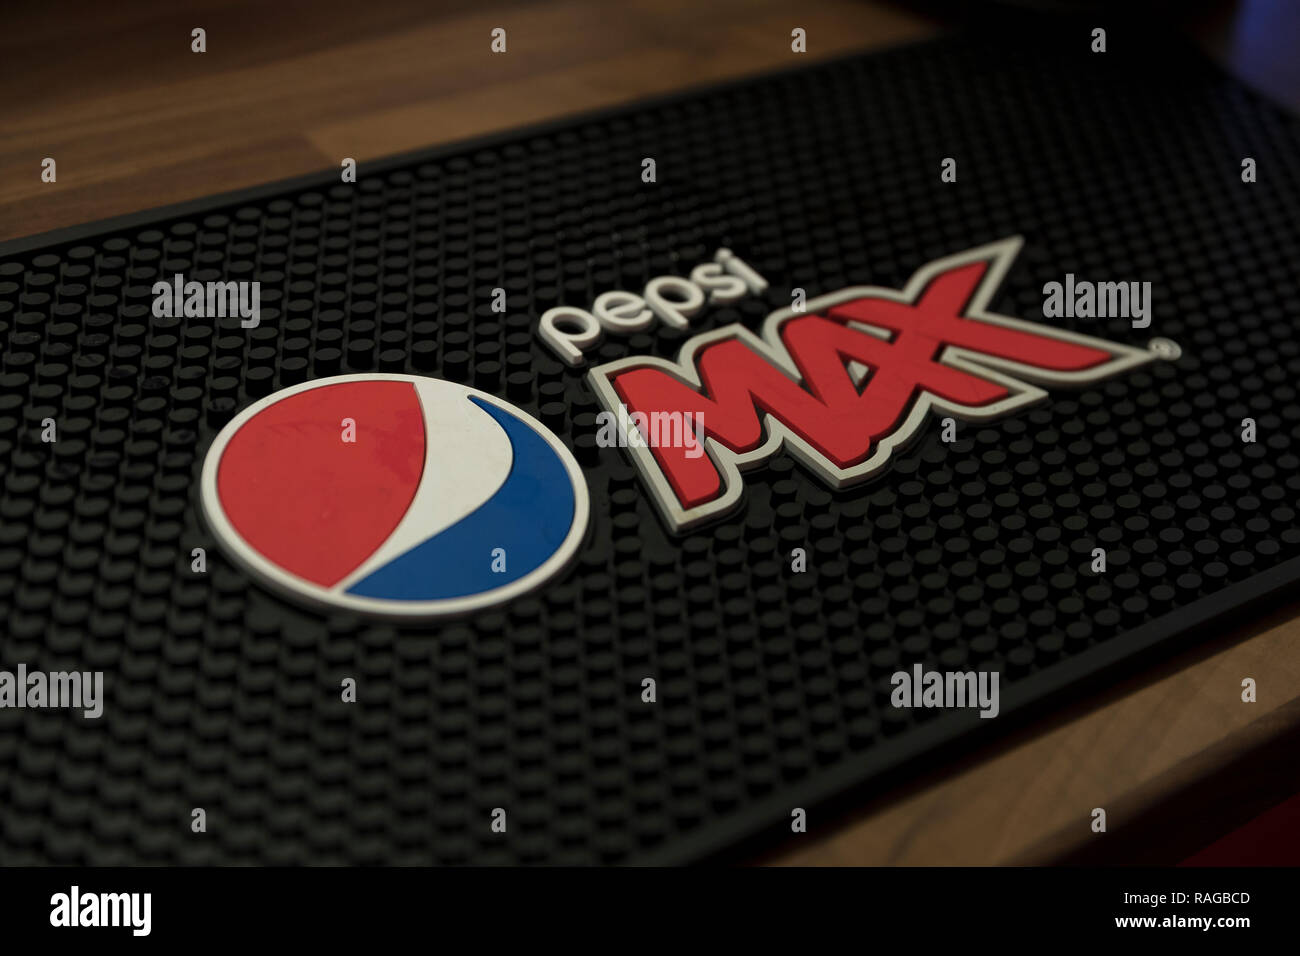 London, United Kingdom - December 30th 2018: Pepsi Max rubber drink mat on the wooden surface at the bar Stock Photo